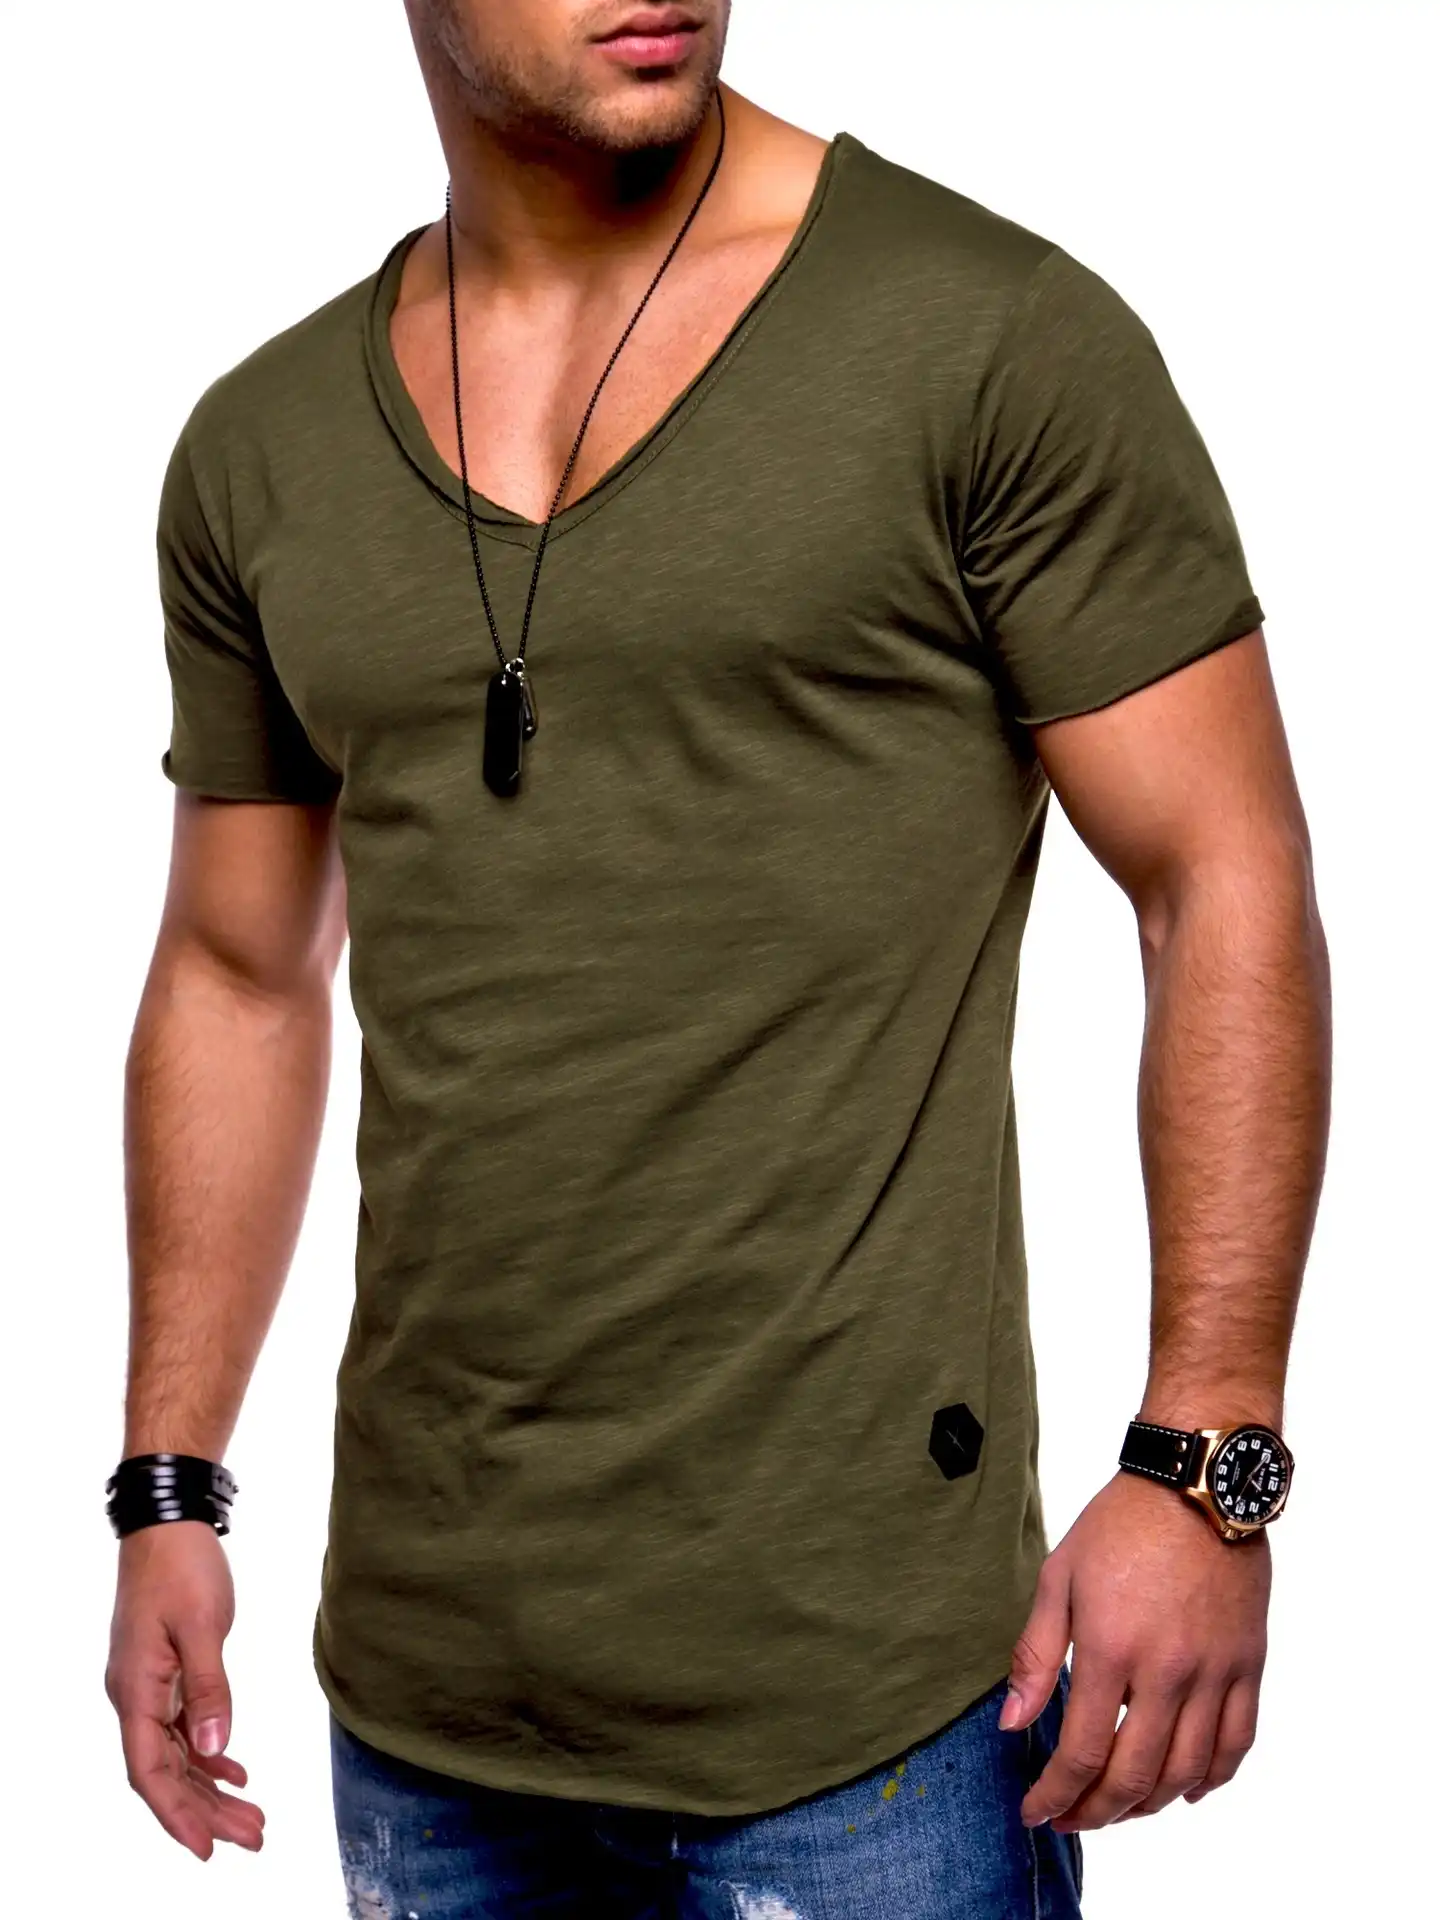 Find Discount Fashion Outfits for Men Online Shopping